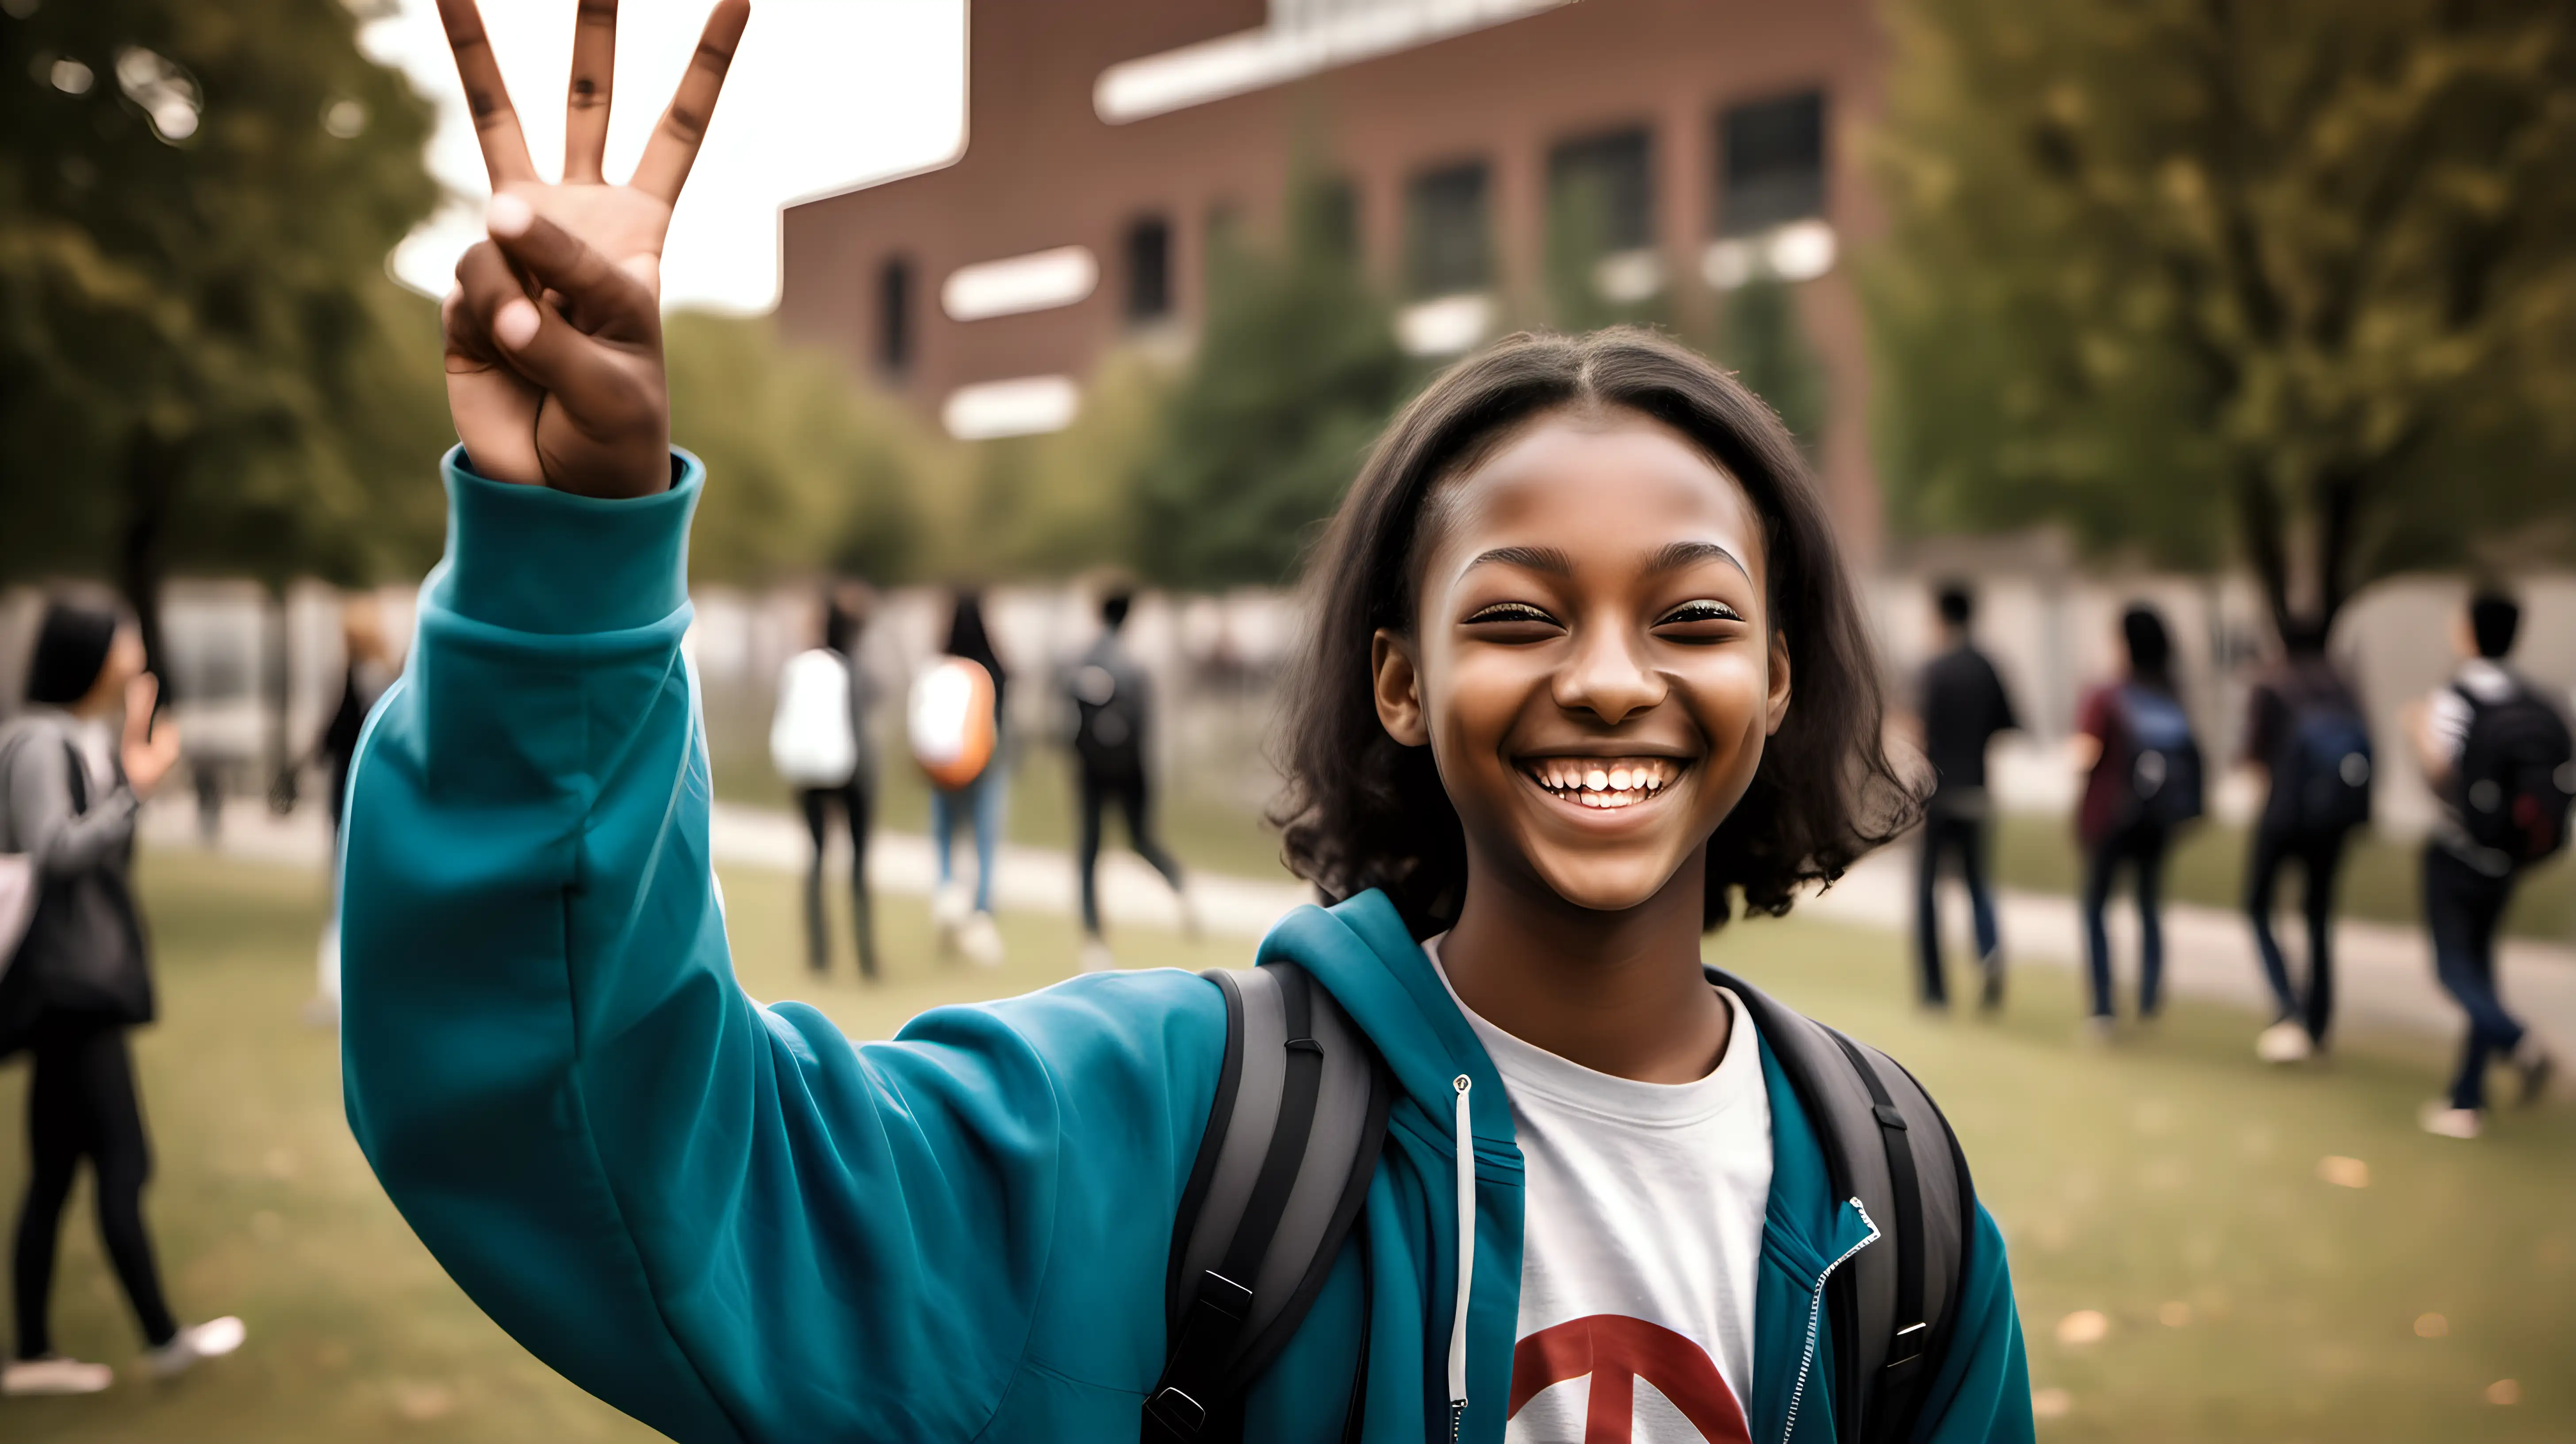 Triumphant Student Celebrating Success with Peace Sign Gesture